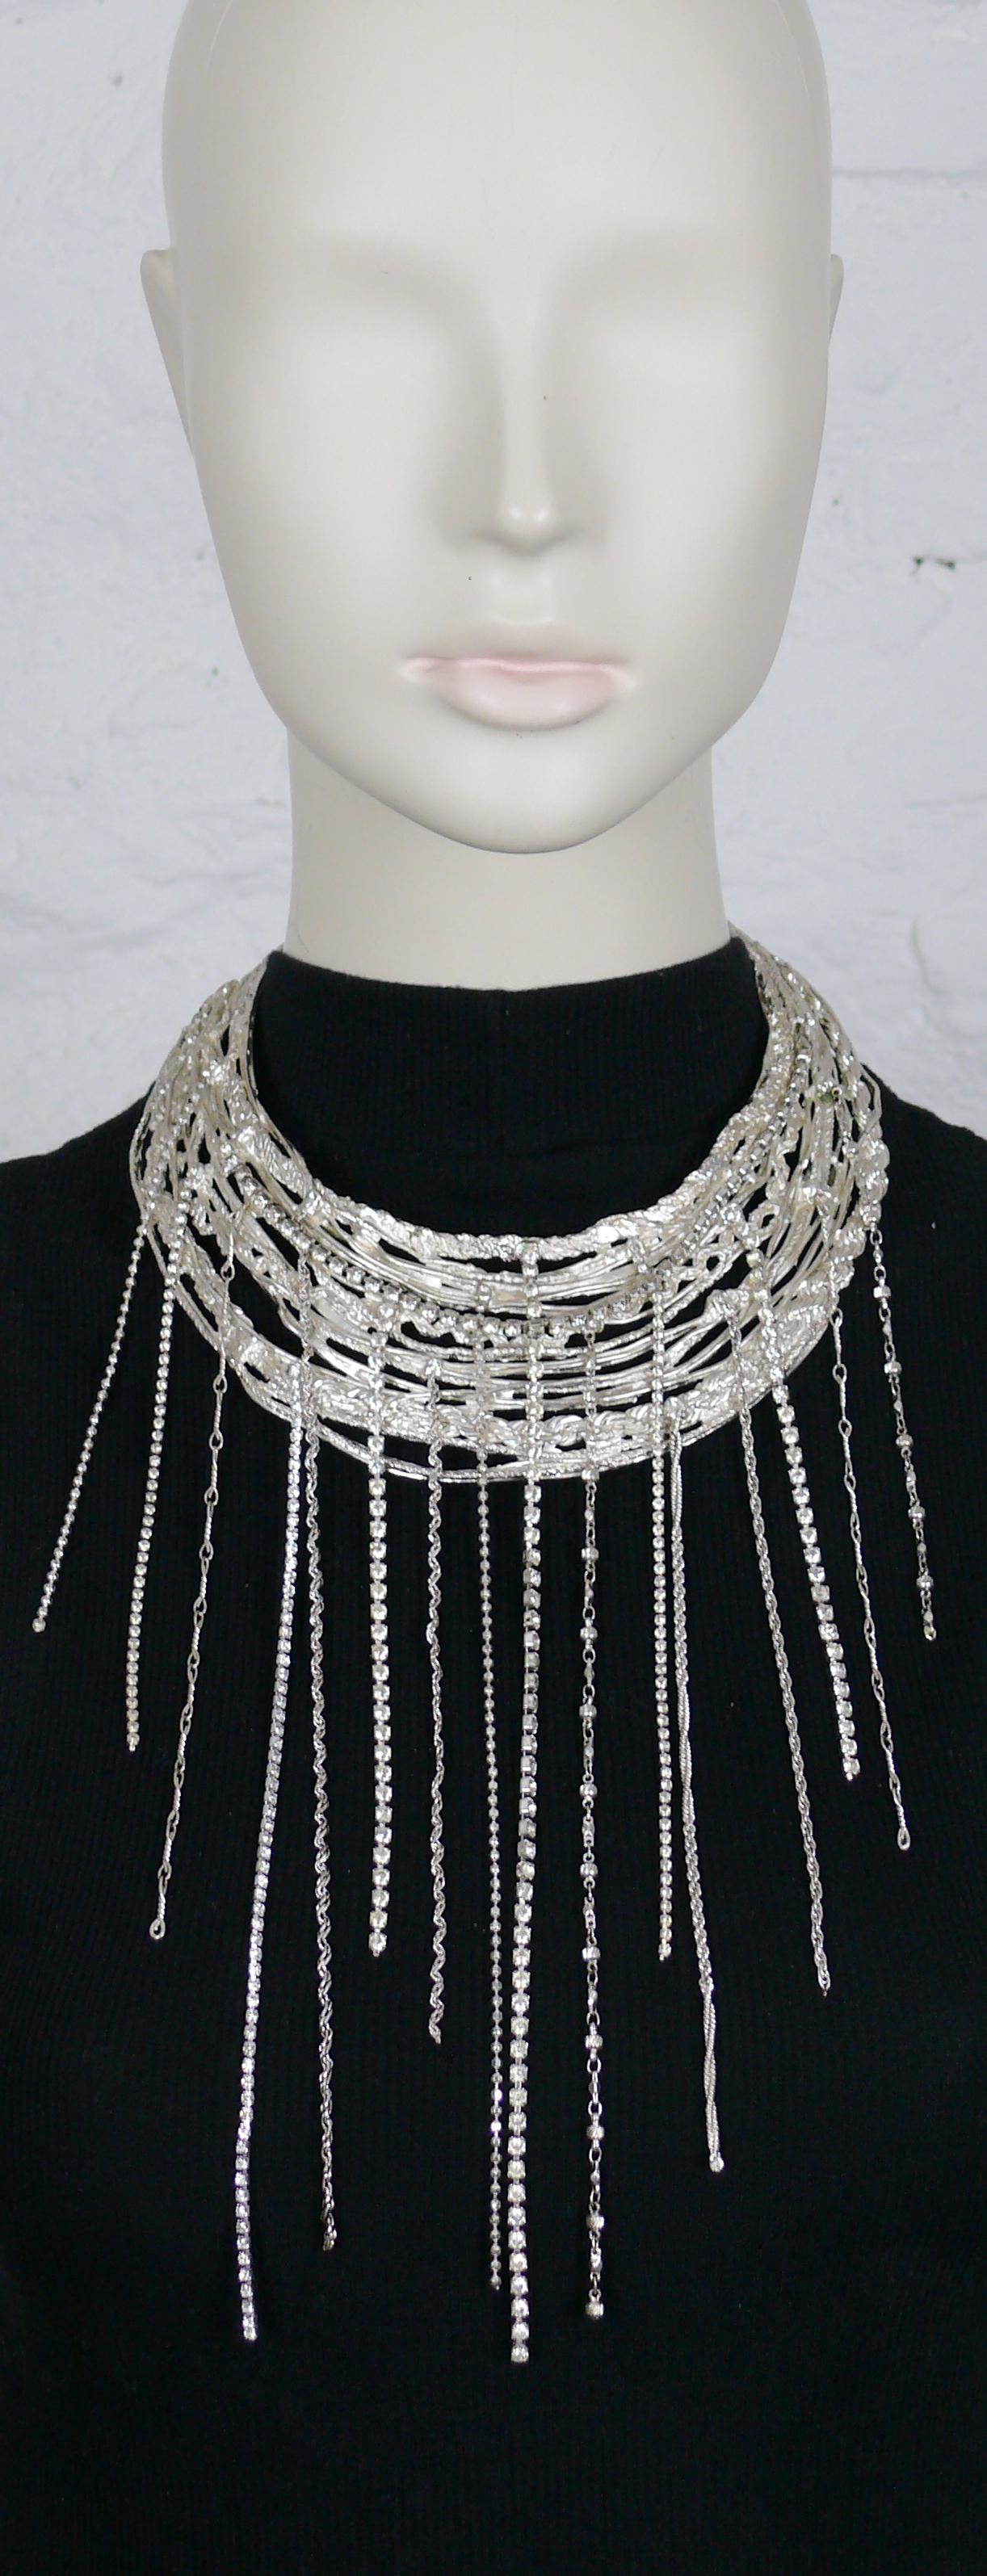 CHRISTIAN LACROIX vintage opulent silver toned bib necklace embellished with a rain of clear crystals and chains.

Silver tone metal hardware.

Adustable hook clasp closure.

Marked CHRISTIAN LACROIX CL Made in France.

Indicative measurements :